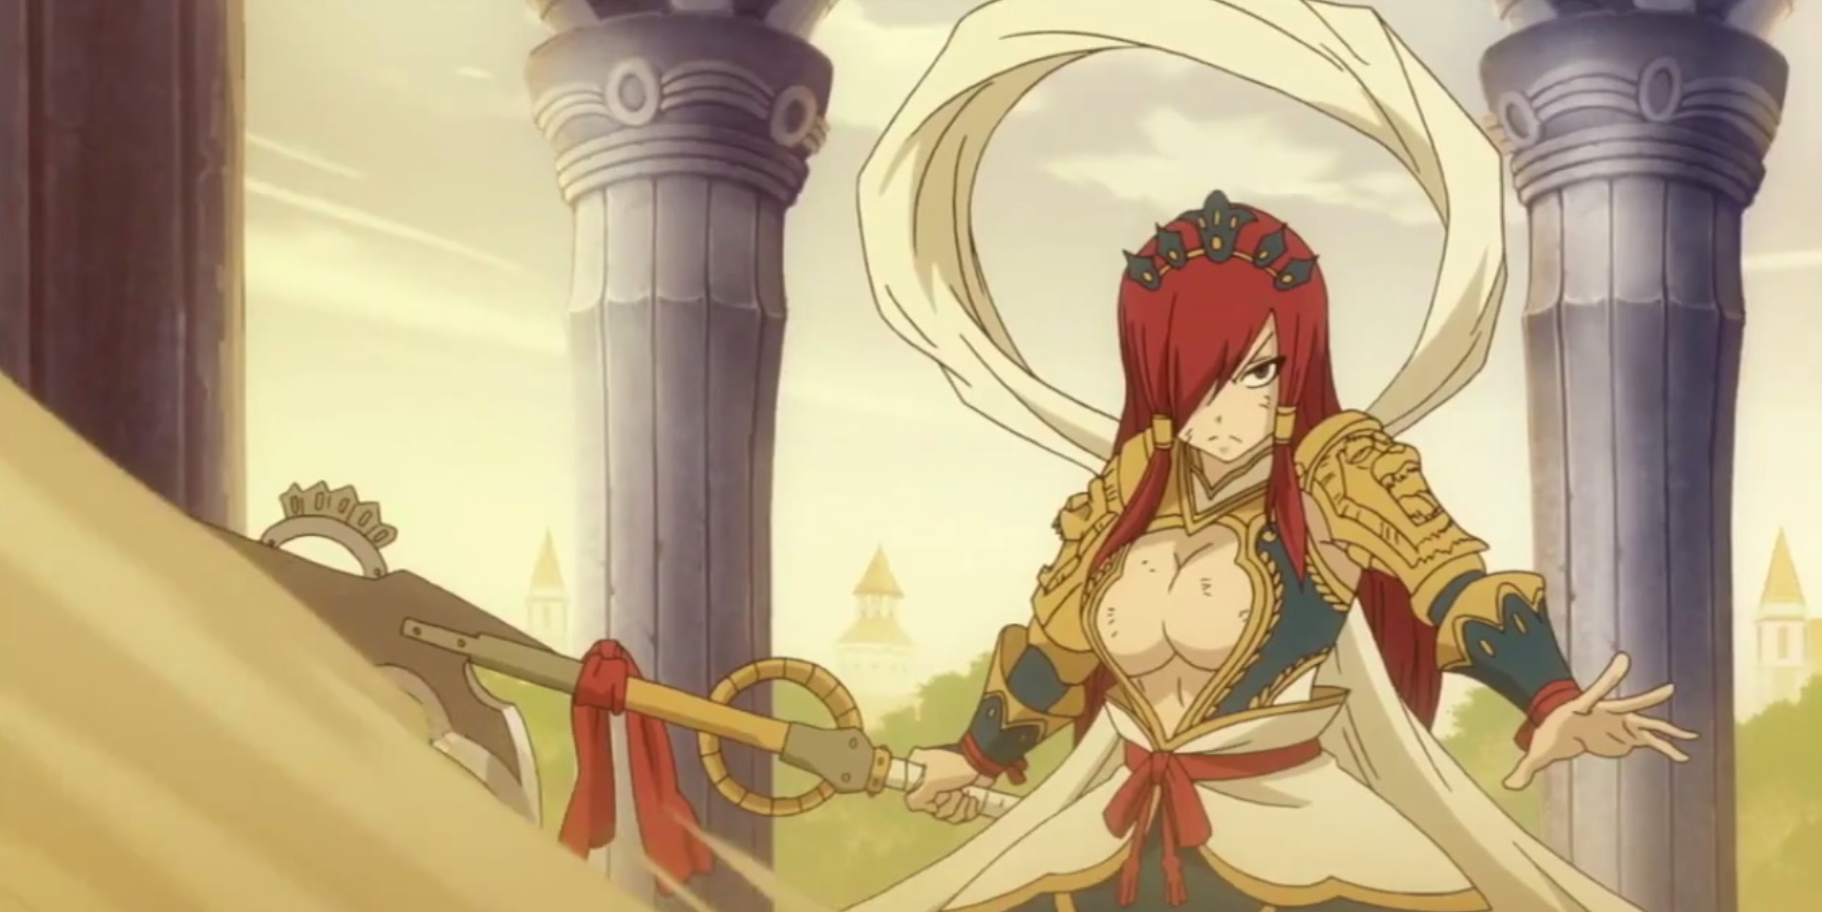 Fairy Tail's Erza Scarlet wearing her Nakagami Armor.